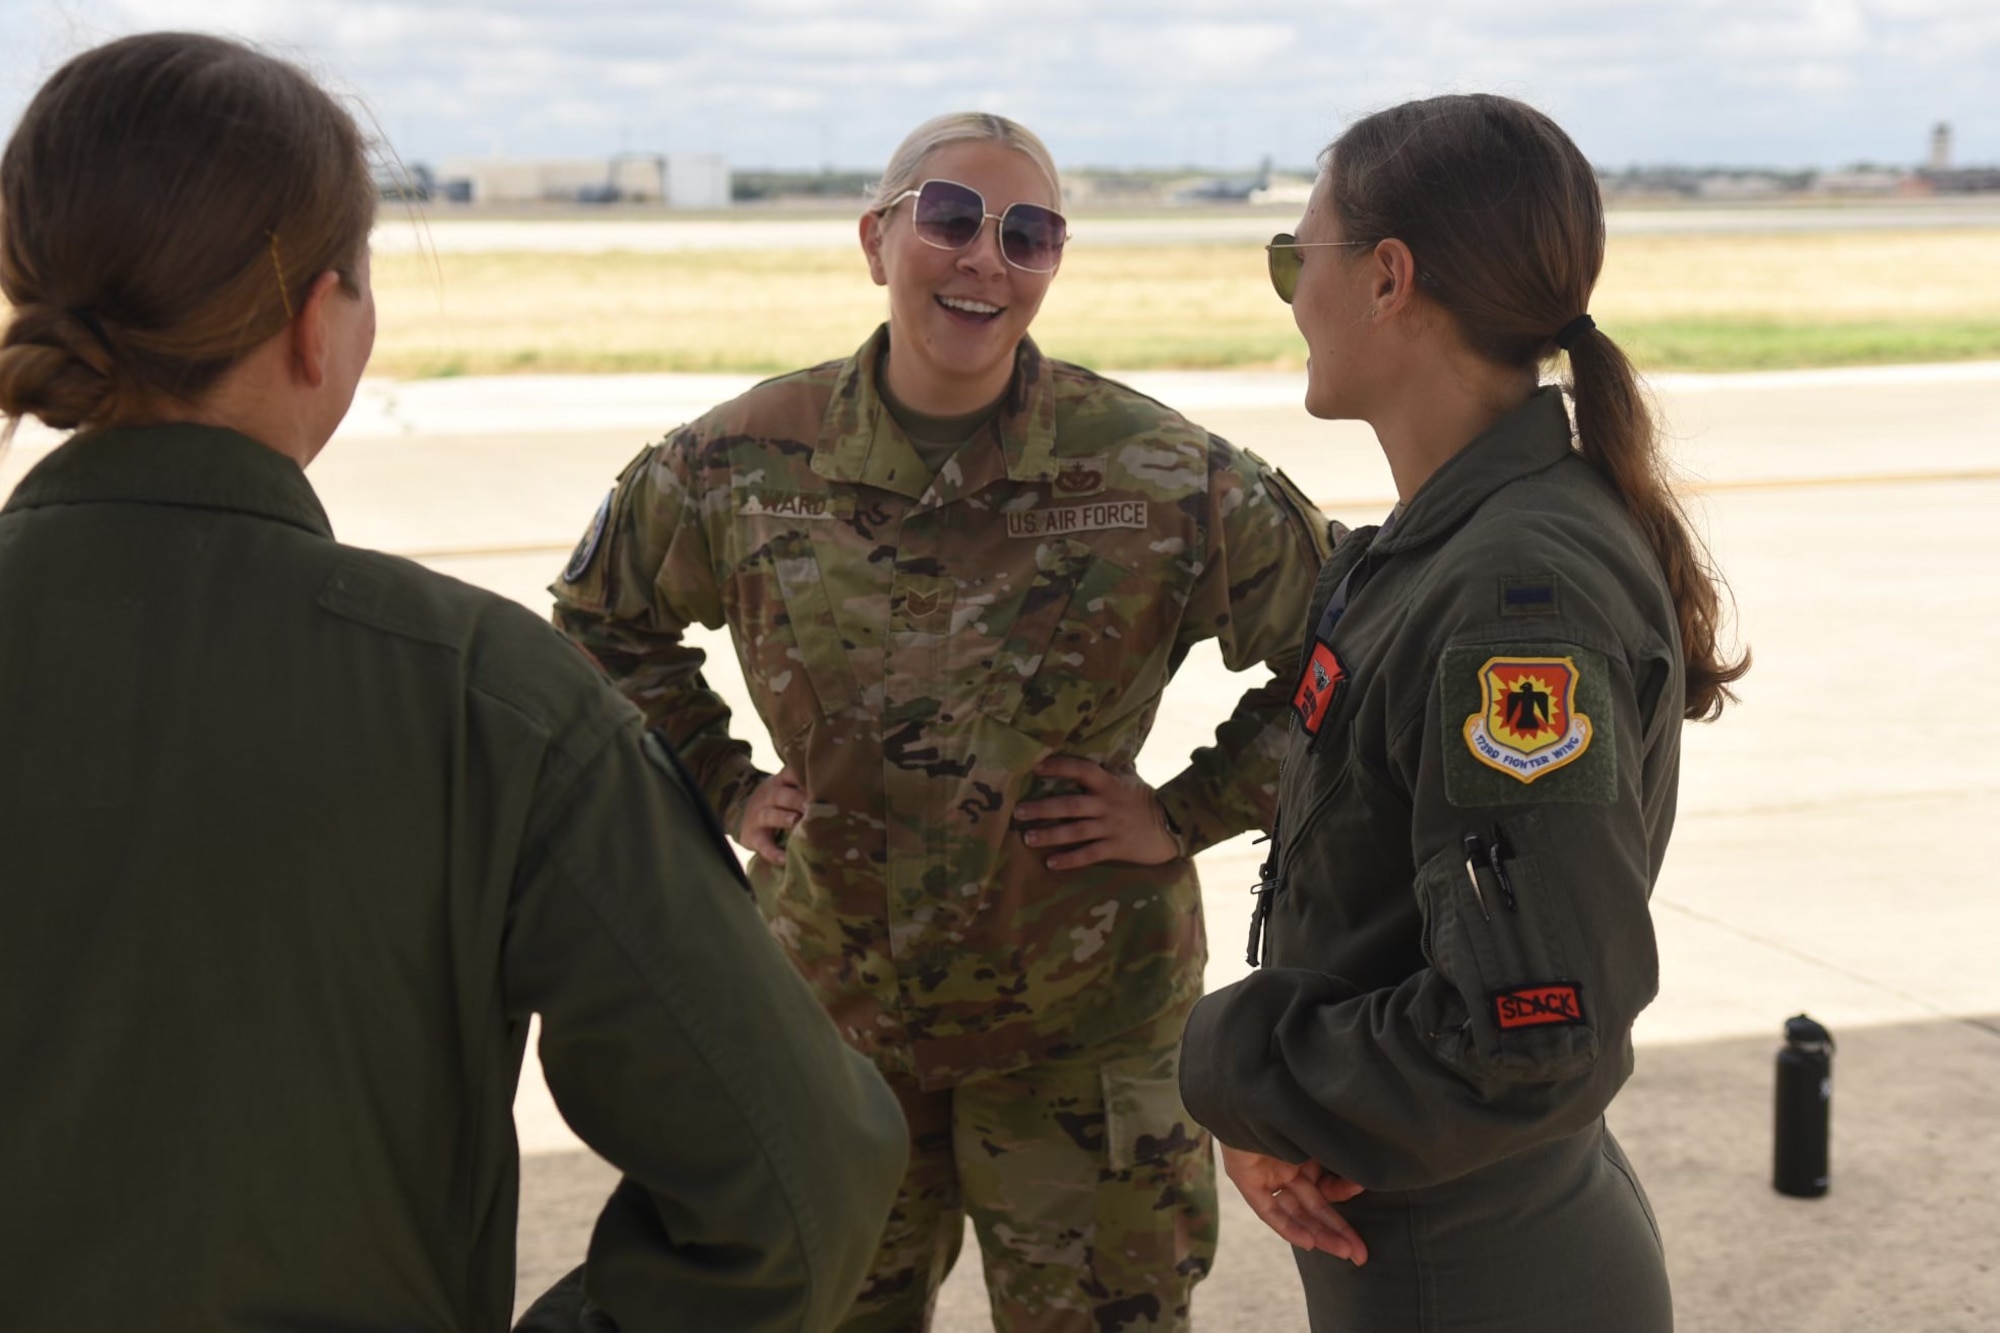 Two women in flights suits and another in OCPs engage in conversation outside.